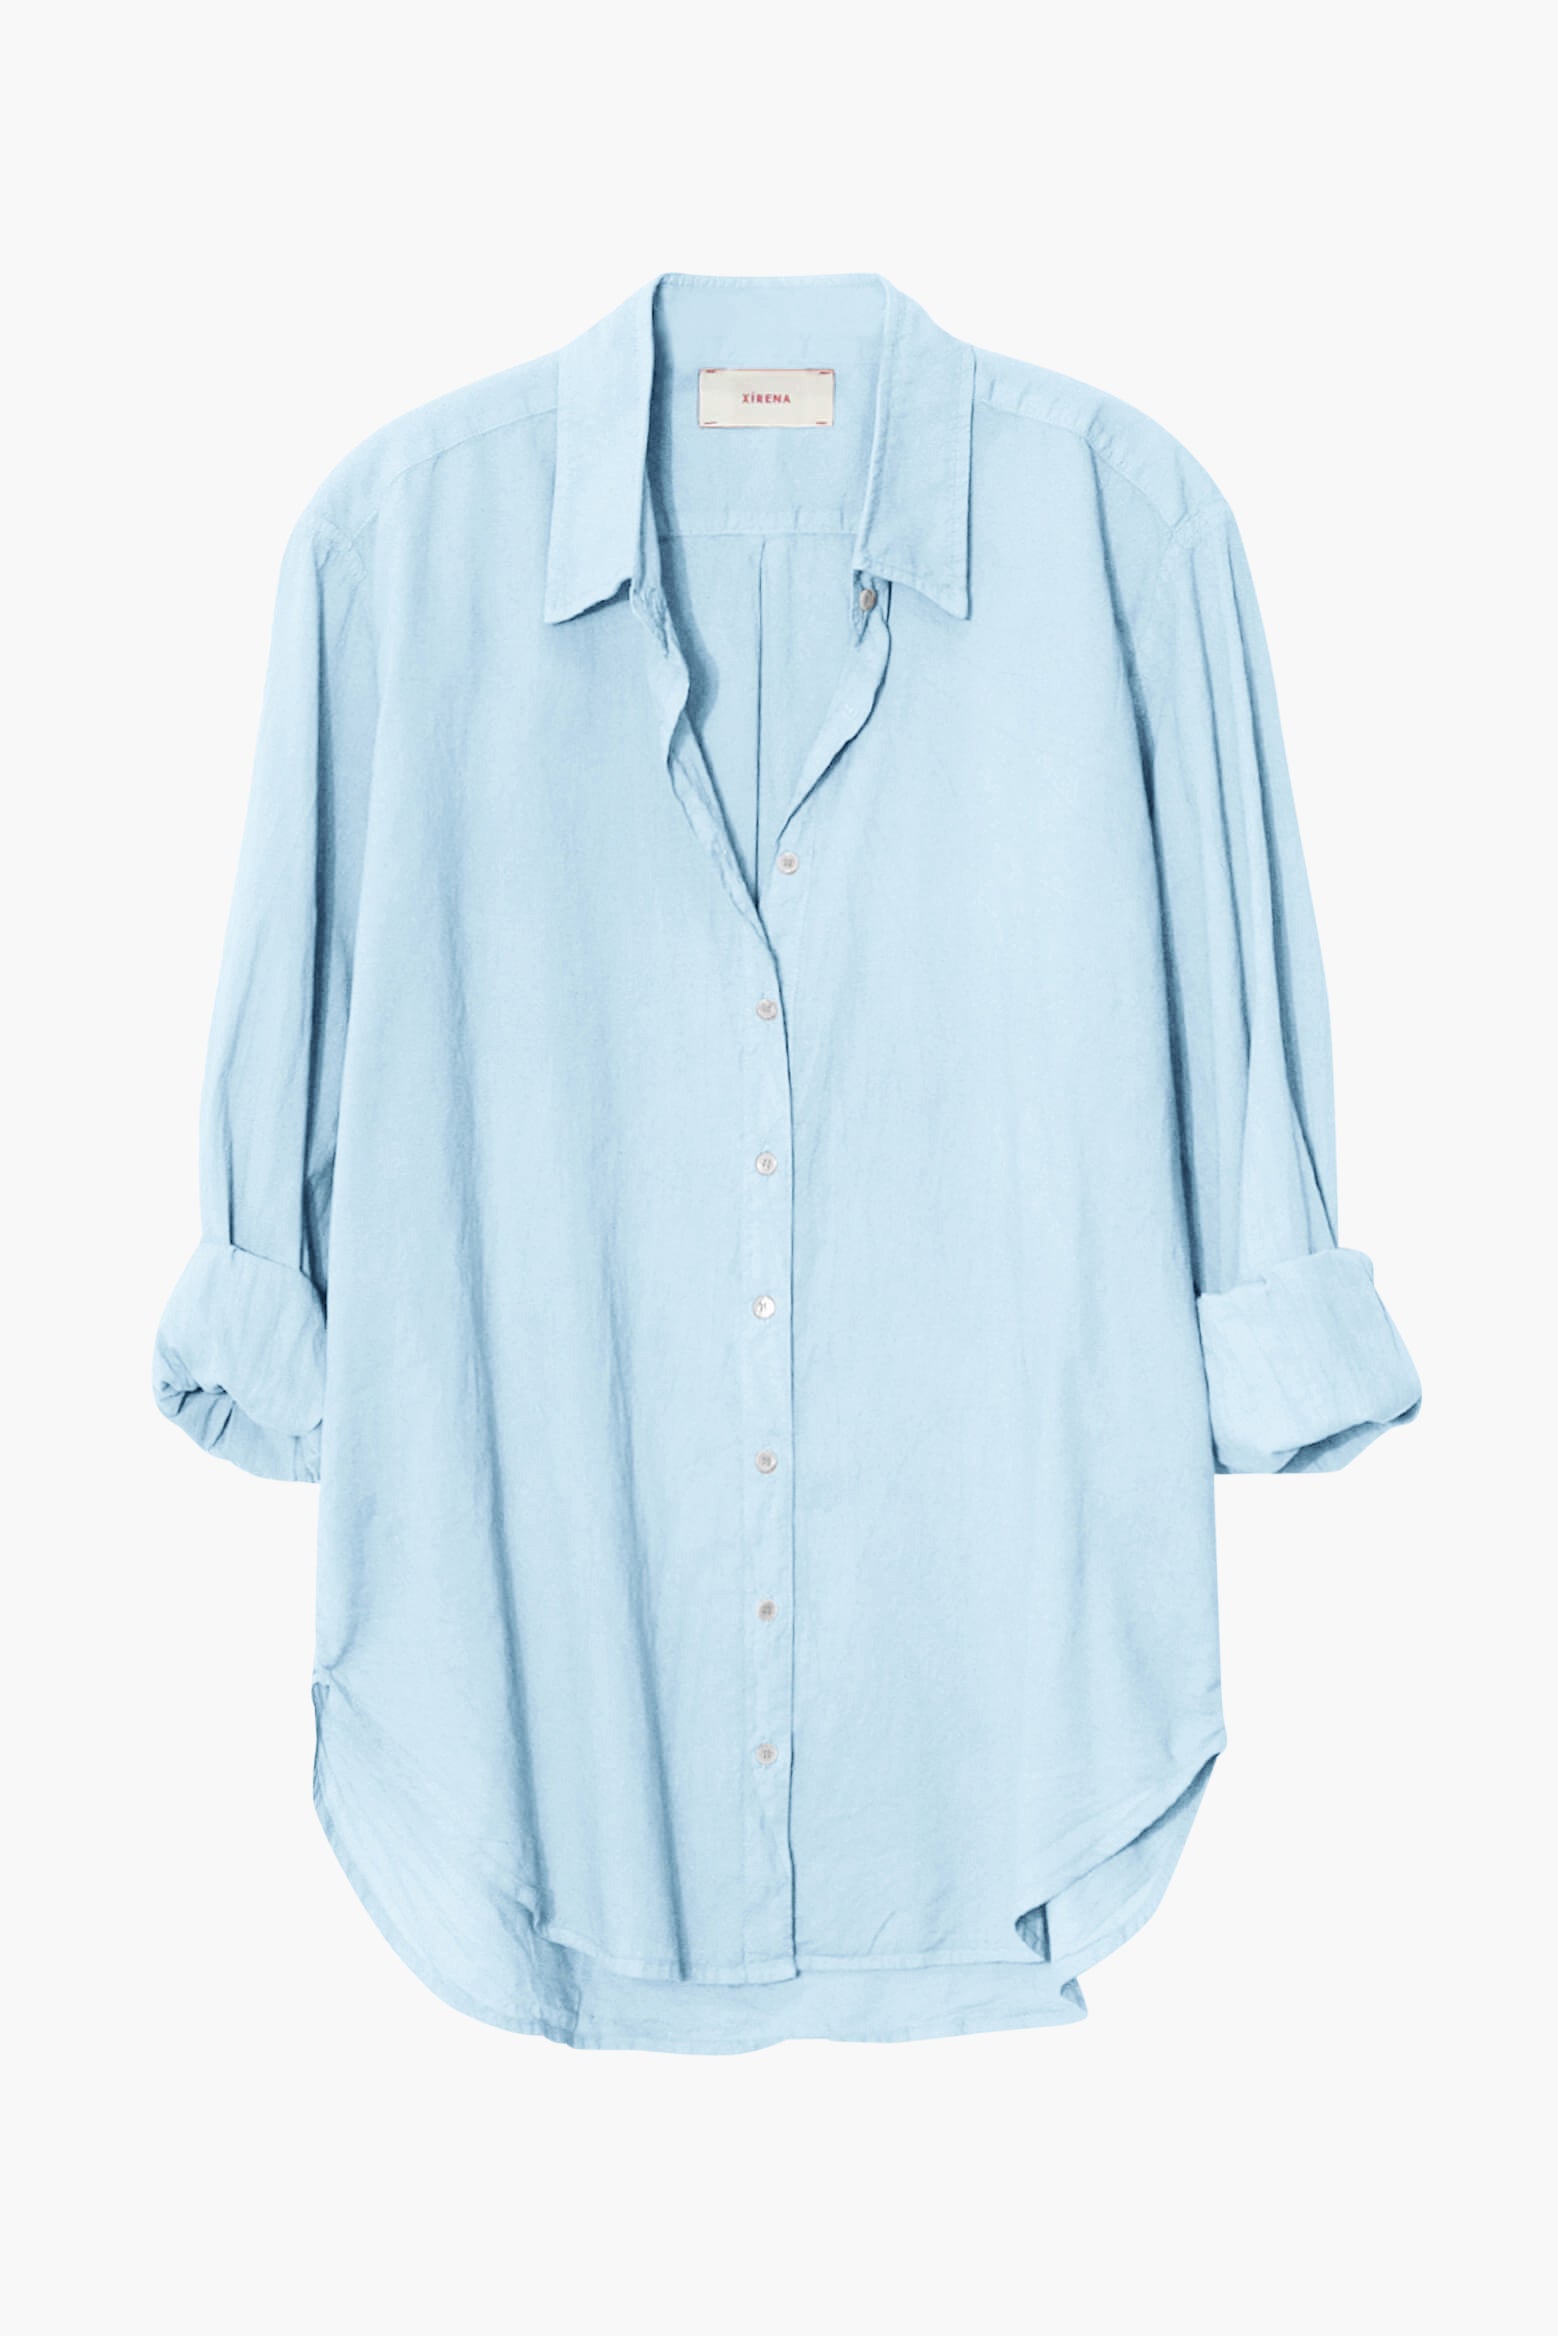 Xirena Beau Shirt in Bluebird available at TNT The New Trend Australia.